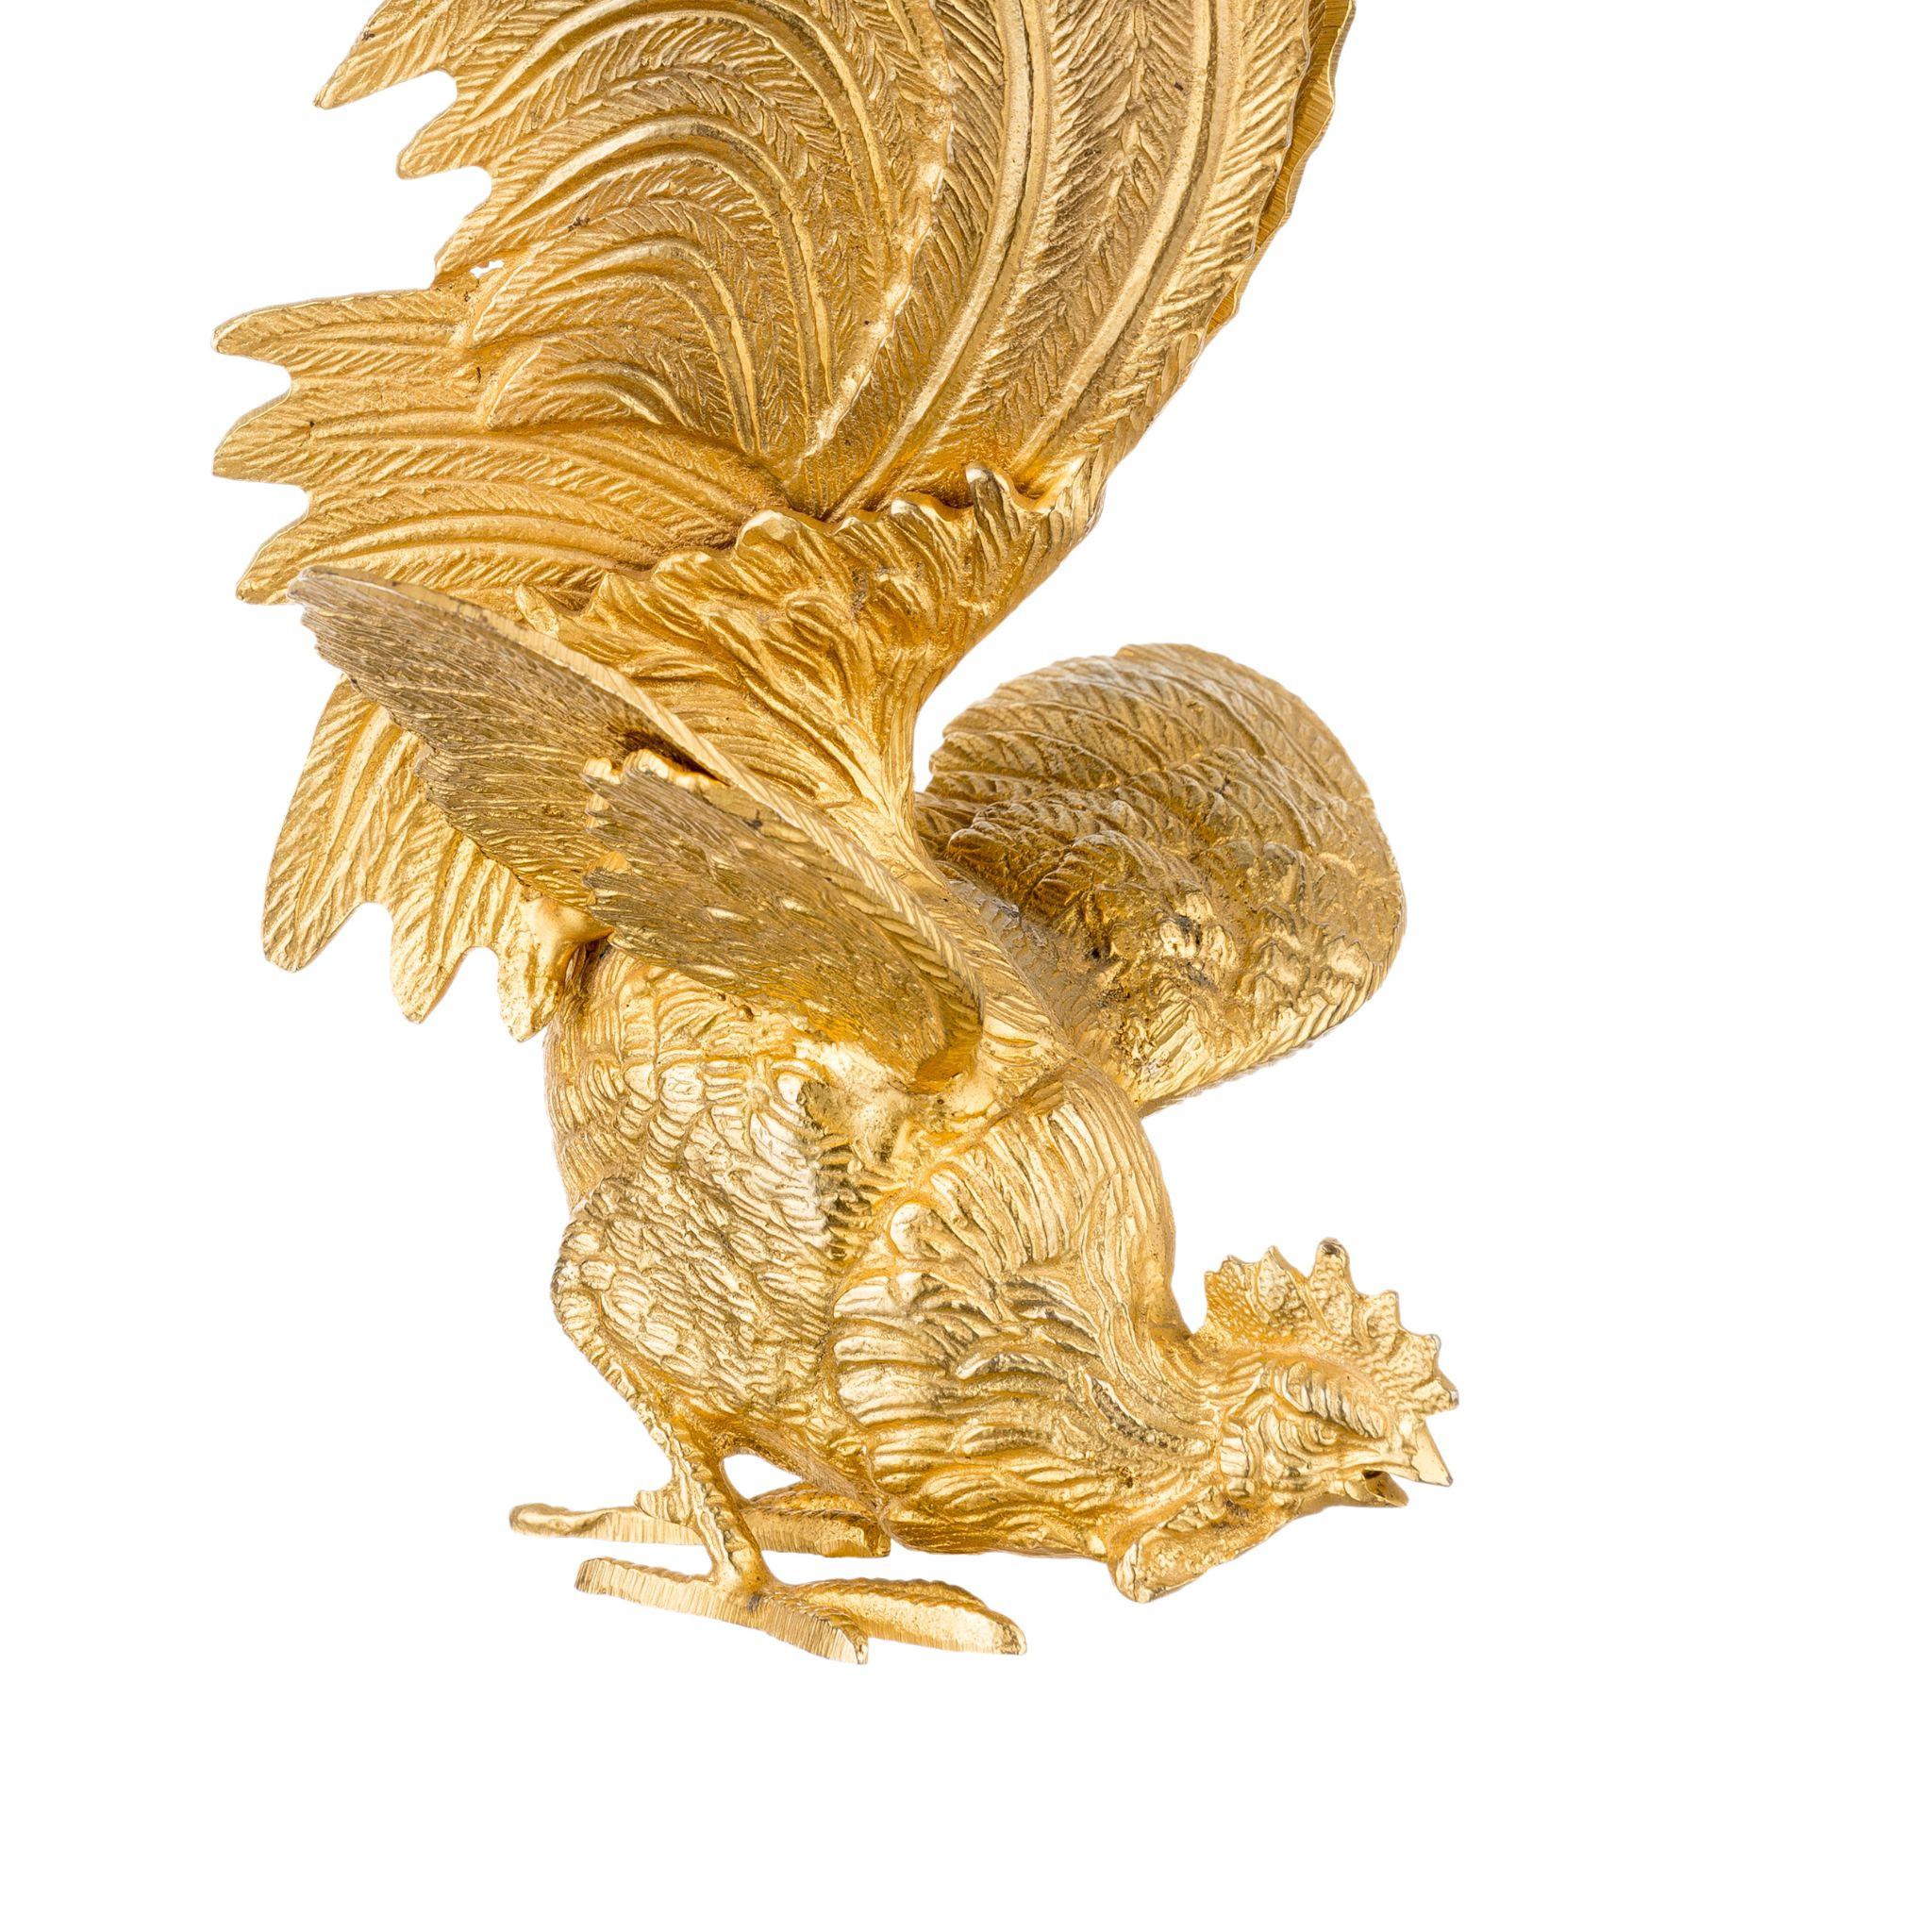 This brass rooster figurine adds a touch of country charm to any space. Handcrafted from durable brass and perched on a sleek stone base, this piece is as sturdy as it is stylish. The intricate details of the rooster's feathers and features are